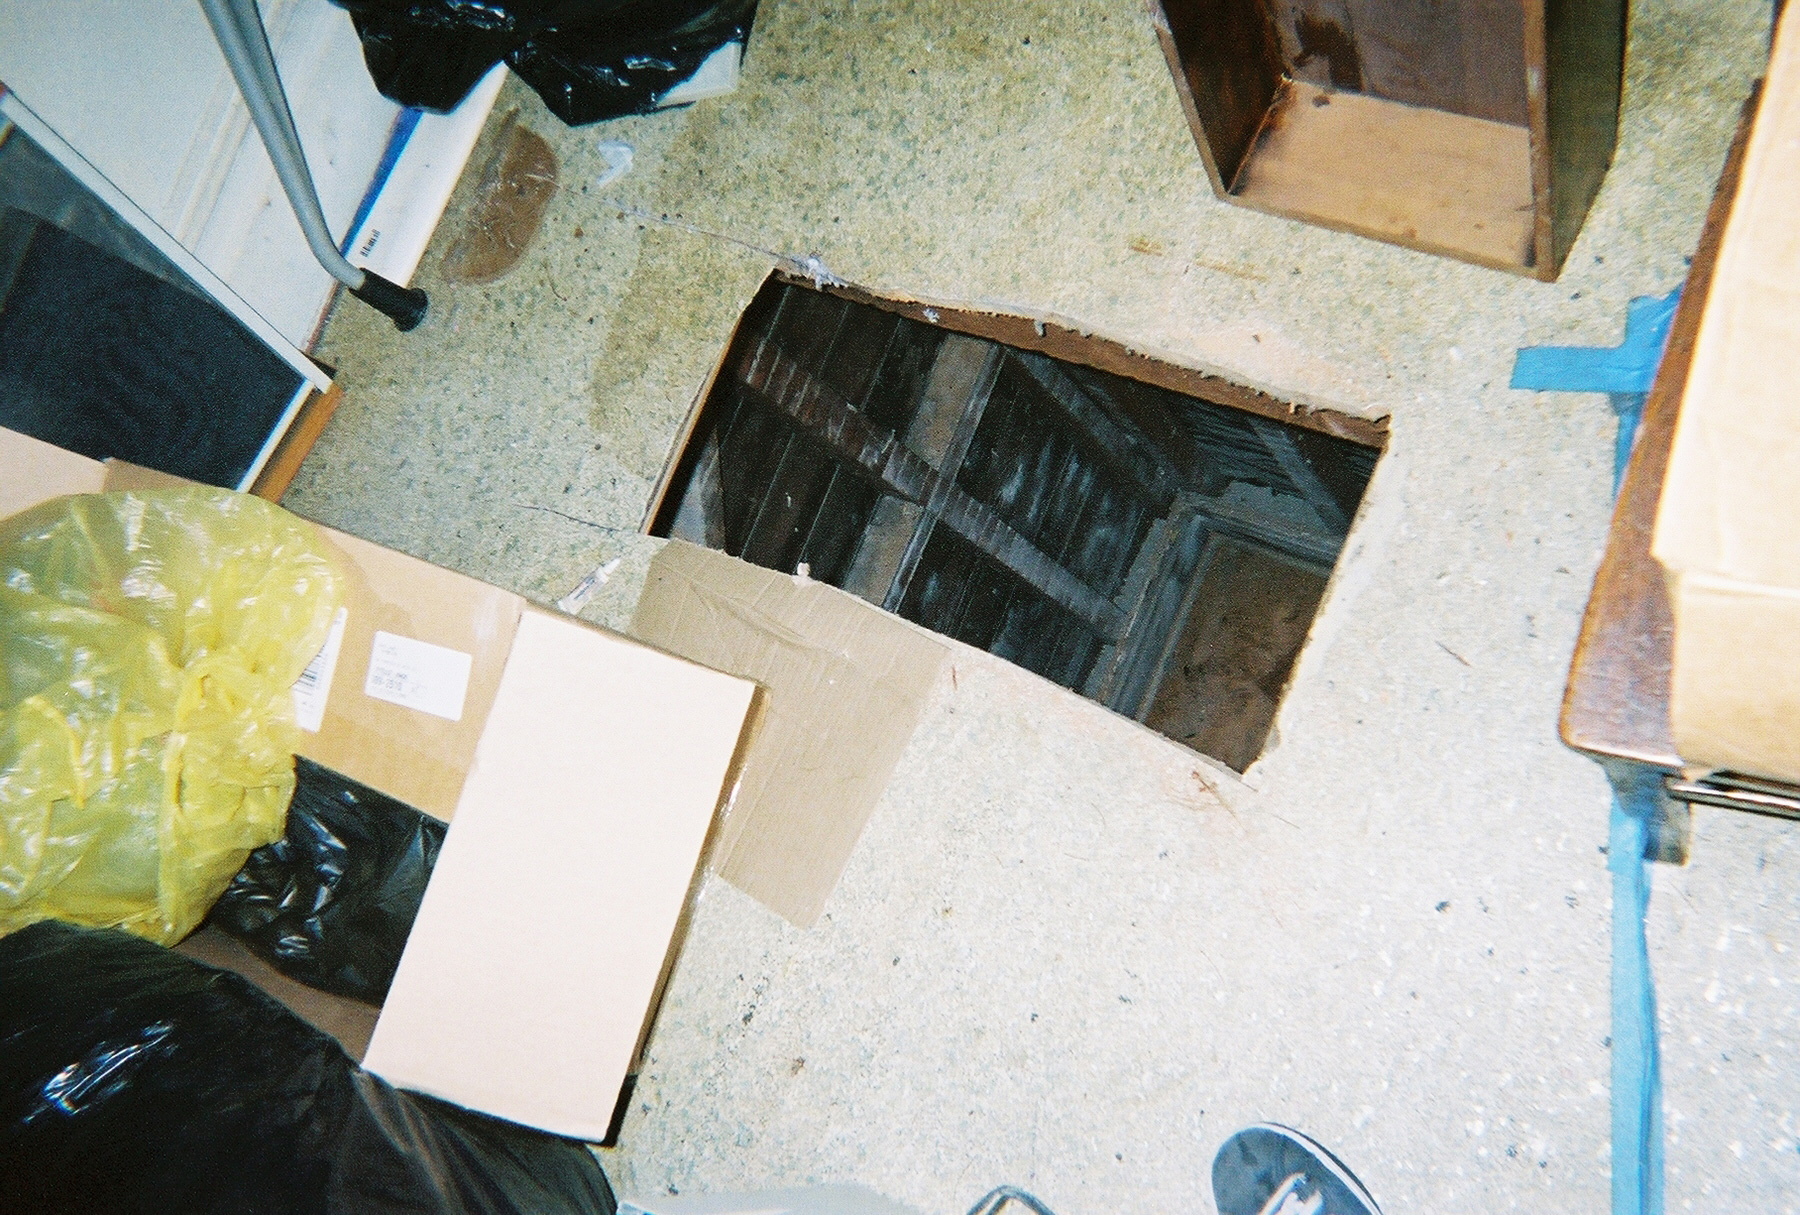 PHOTO: Kip and Nicole Macy cut this hole through the floor of their tenant's apartment with a saw. 